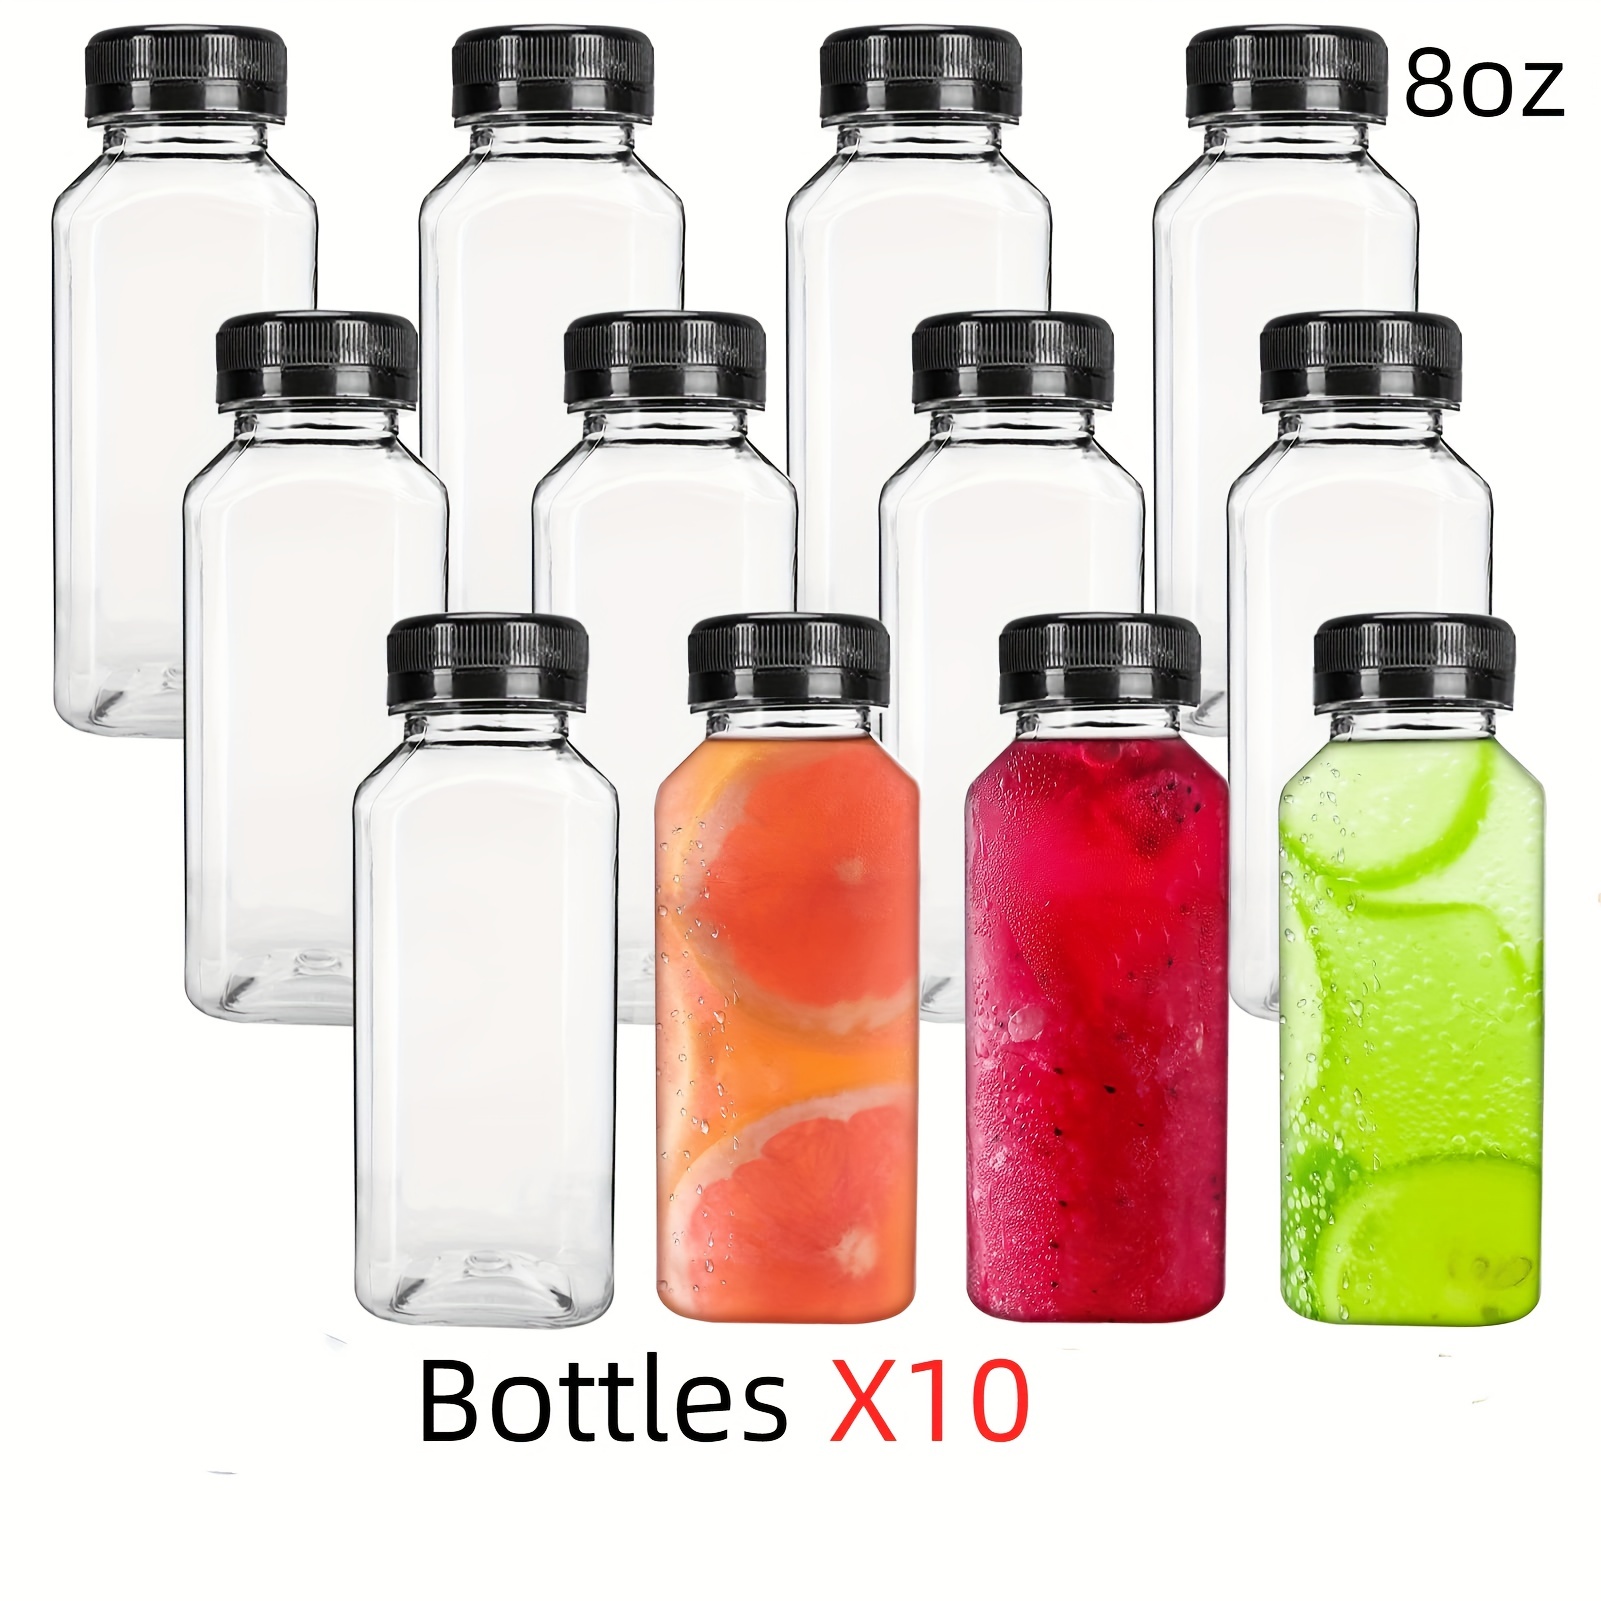 16oz Glass Spray Bottles with Measurements - Amber Empty Reusable  Refillable Container with Funnel and Labels for Mixing, Homemade Cleaning  Products